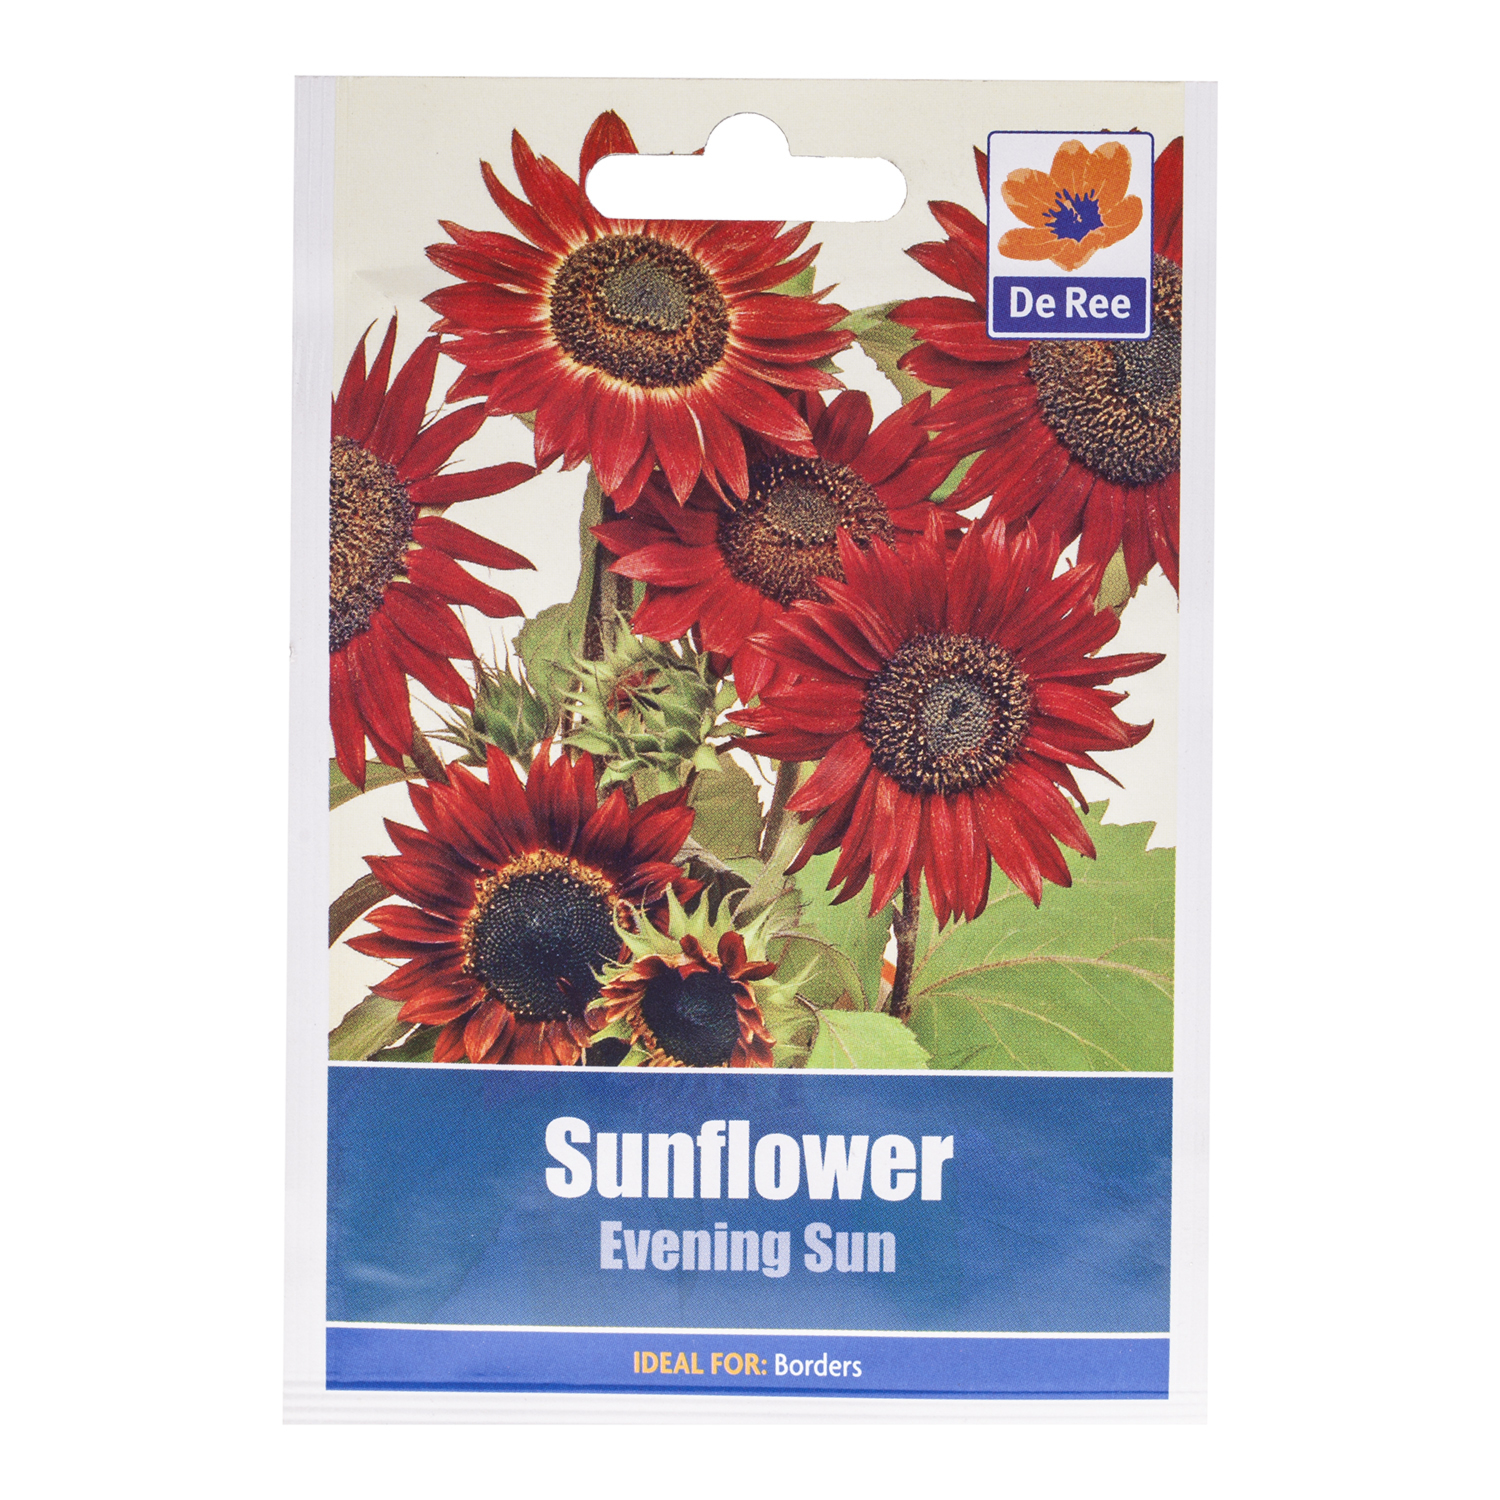 Evening Sun Sunflowers Seed Packet Image